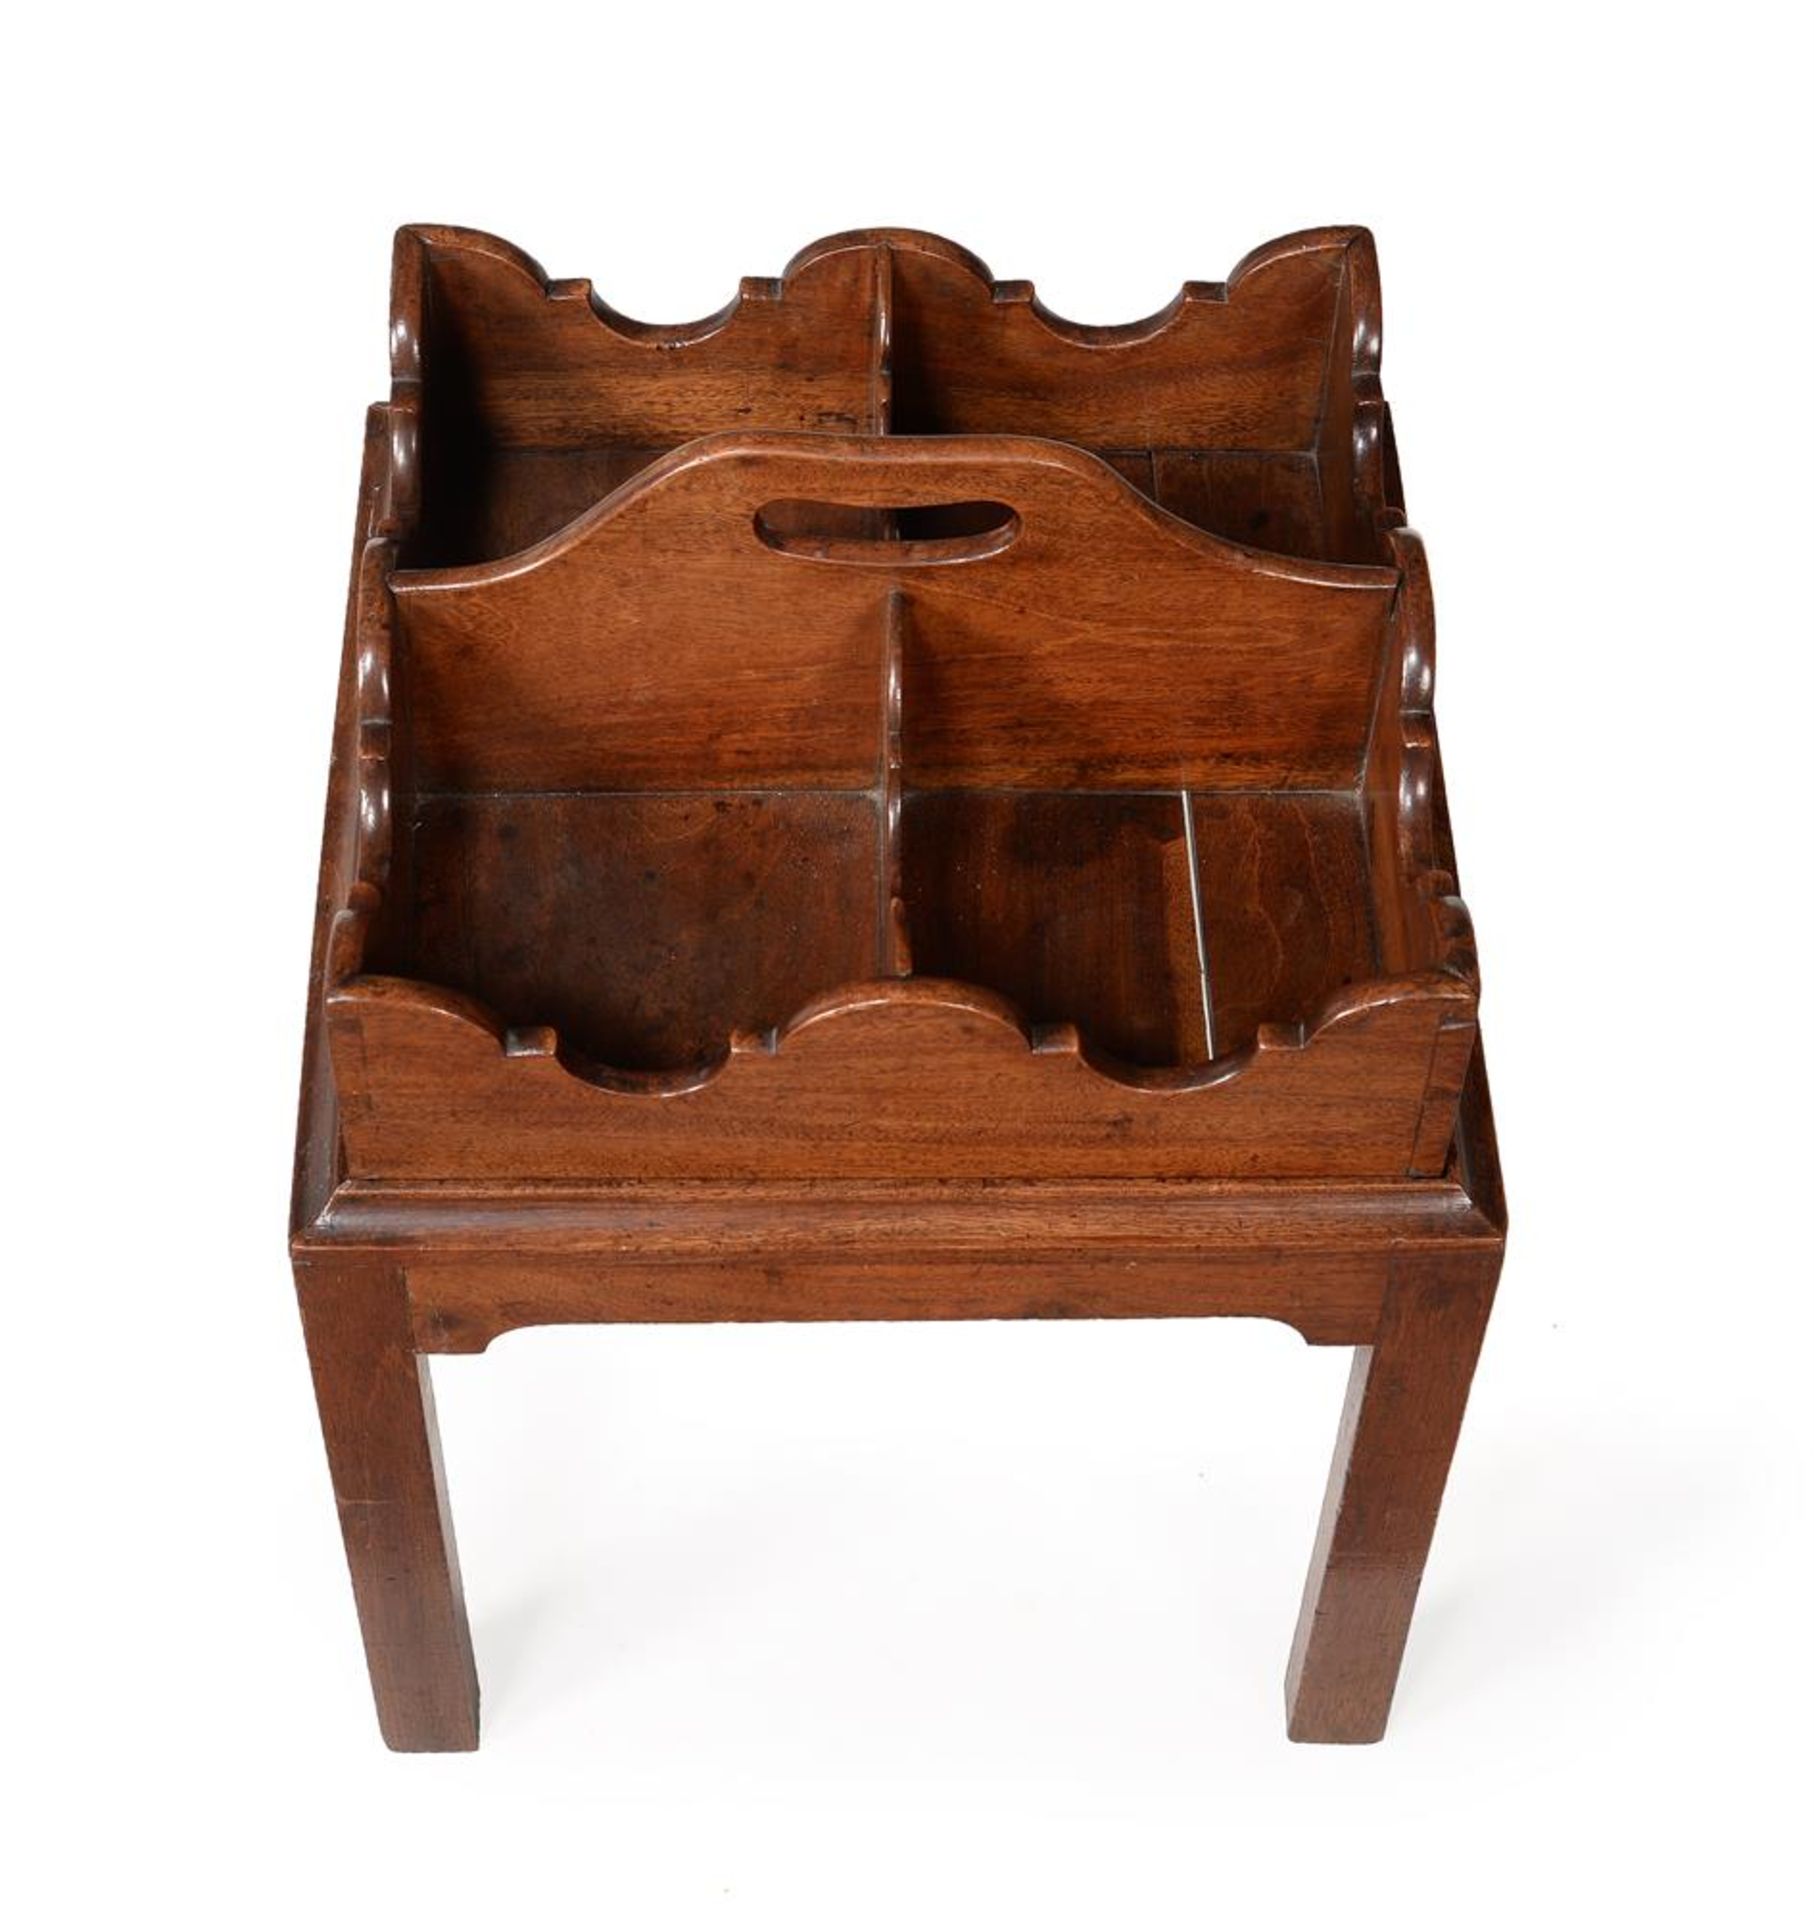 A GEORGE III MAHOGANY BOTTLE TRAY ON STAND, LAST QUARTER 18TH CENTURY - Image 2 of 2